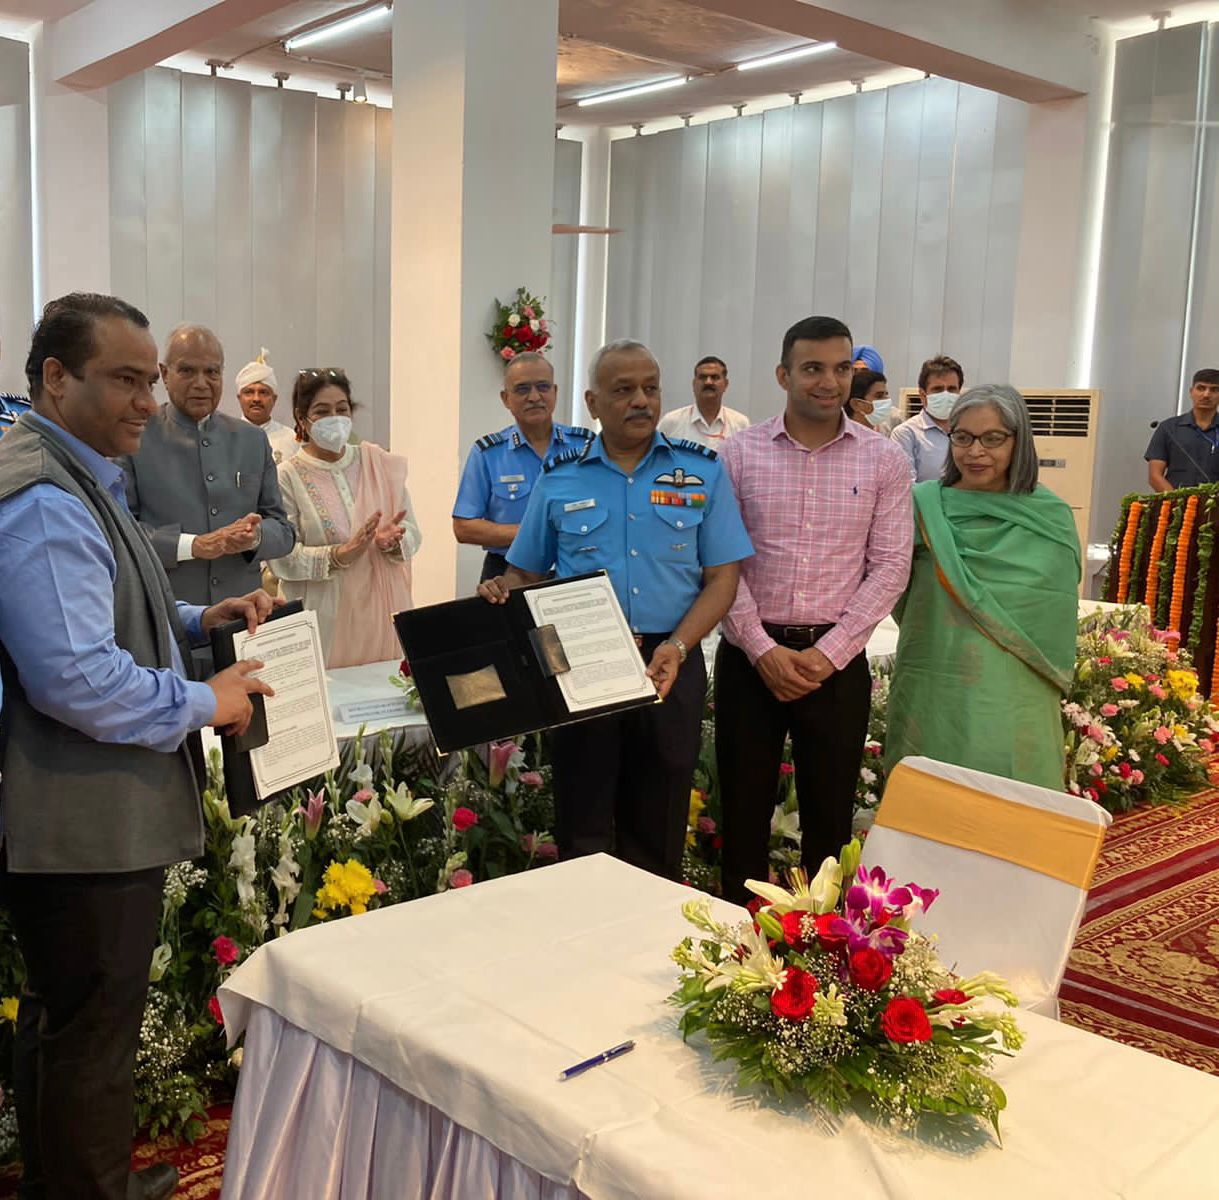 MOU FOR IAF HERITAGE CENTRE AT CHANDIGARH